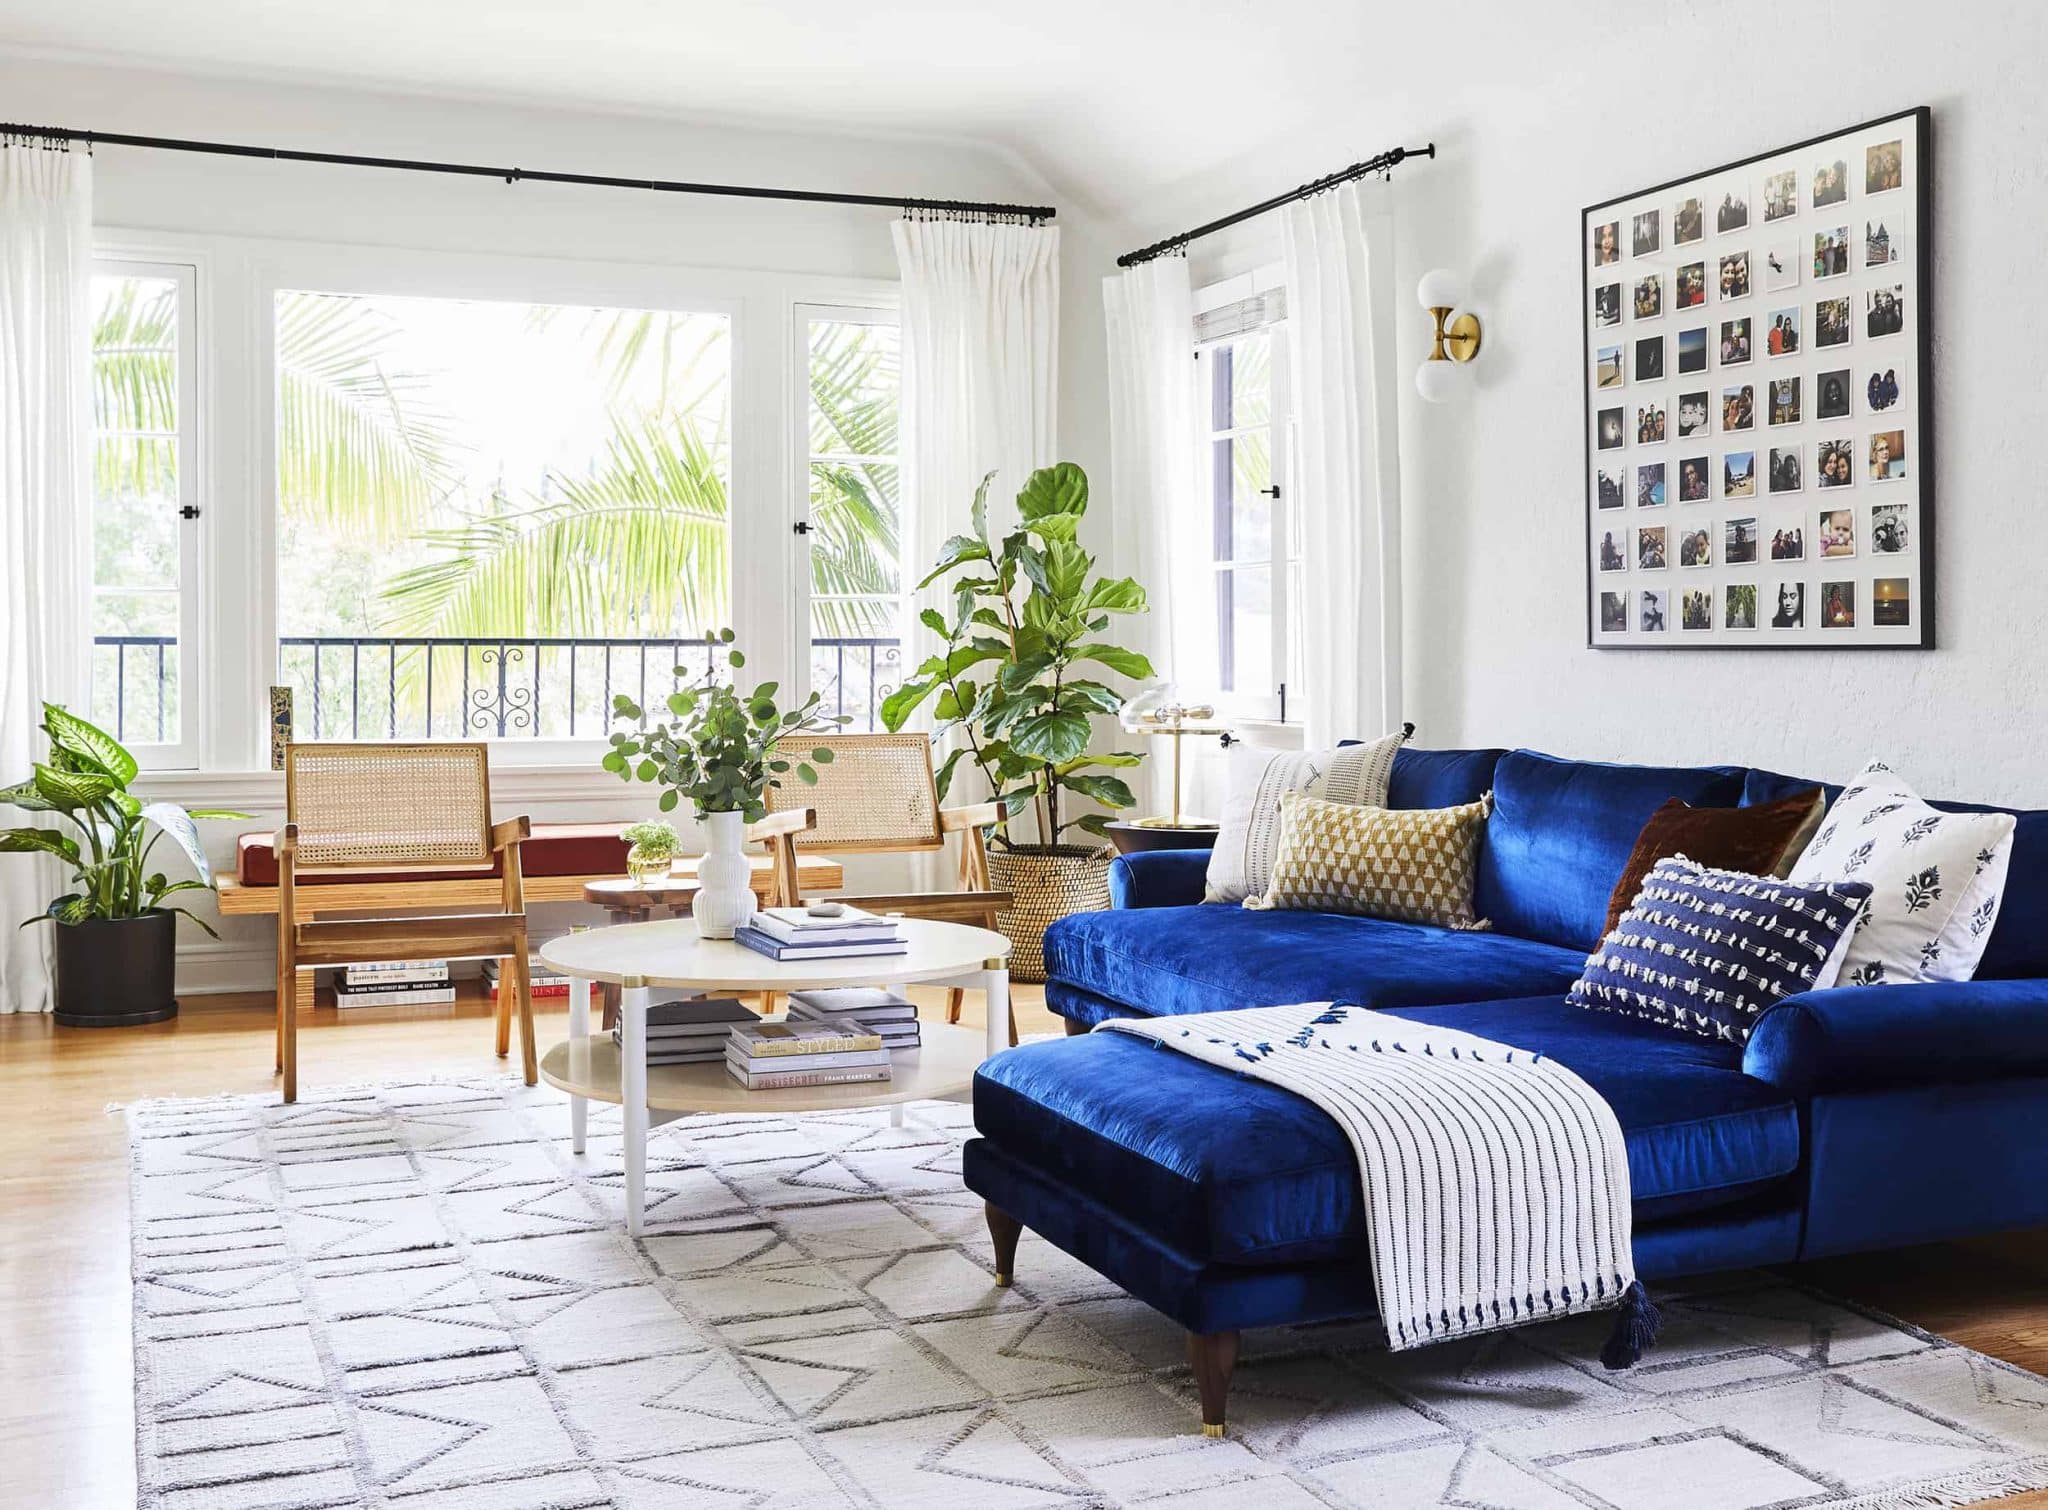 Which Wall Colors Make a Blue Velvet Sofa Stand Out?